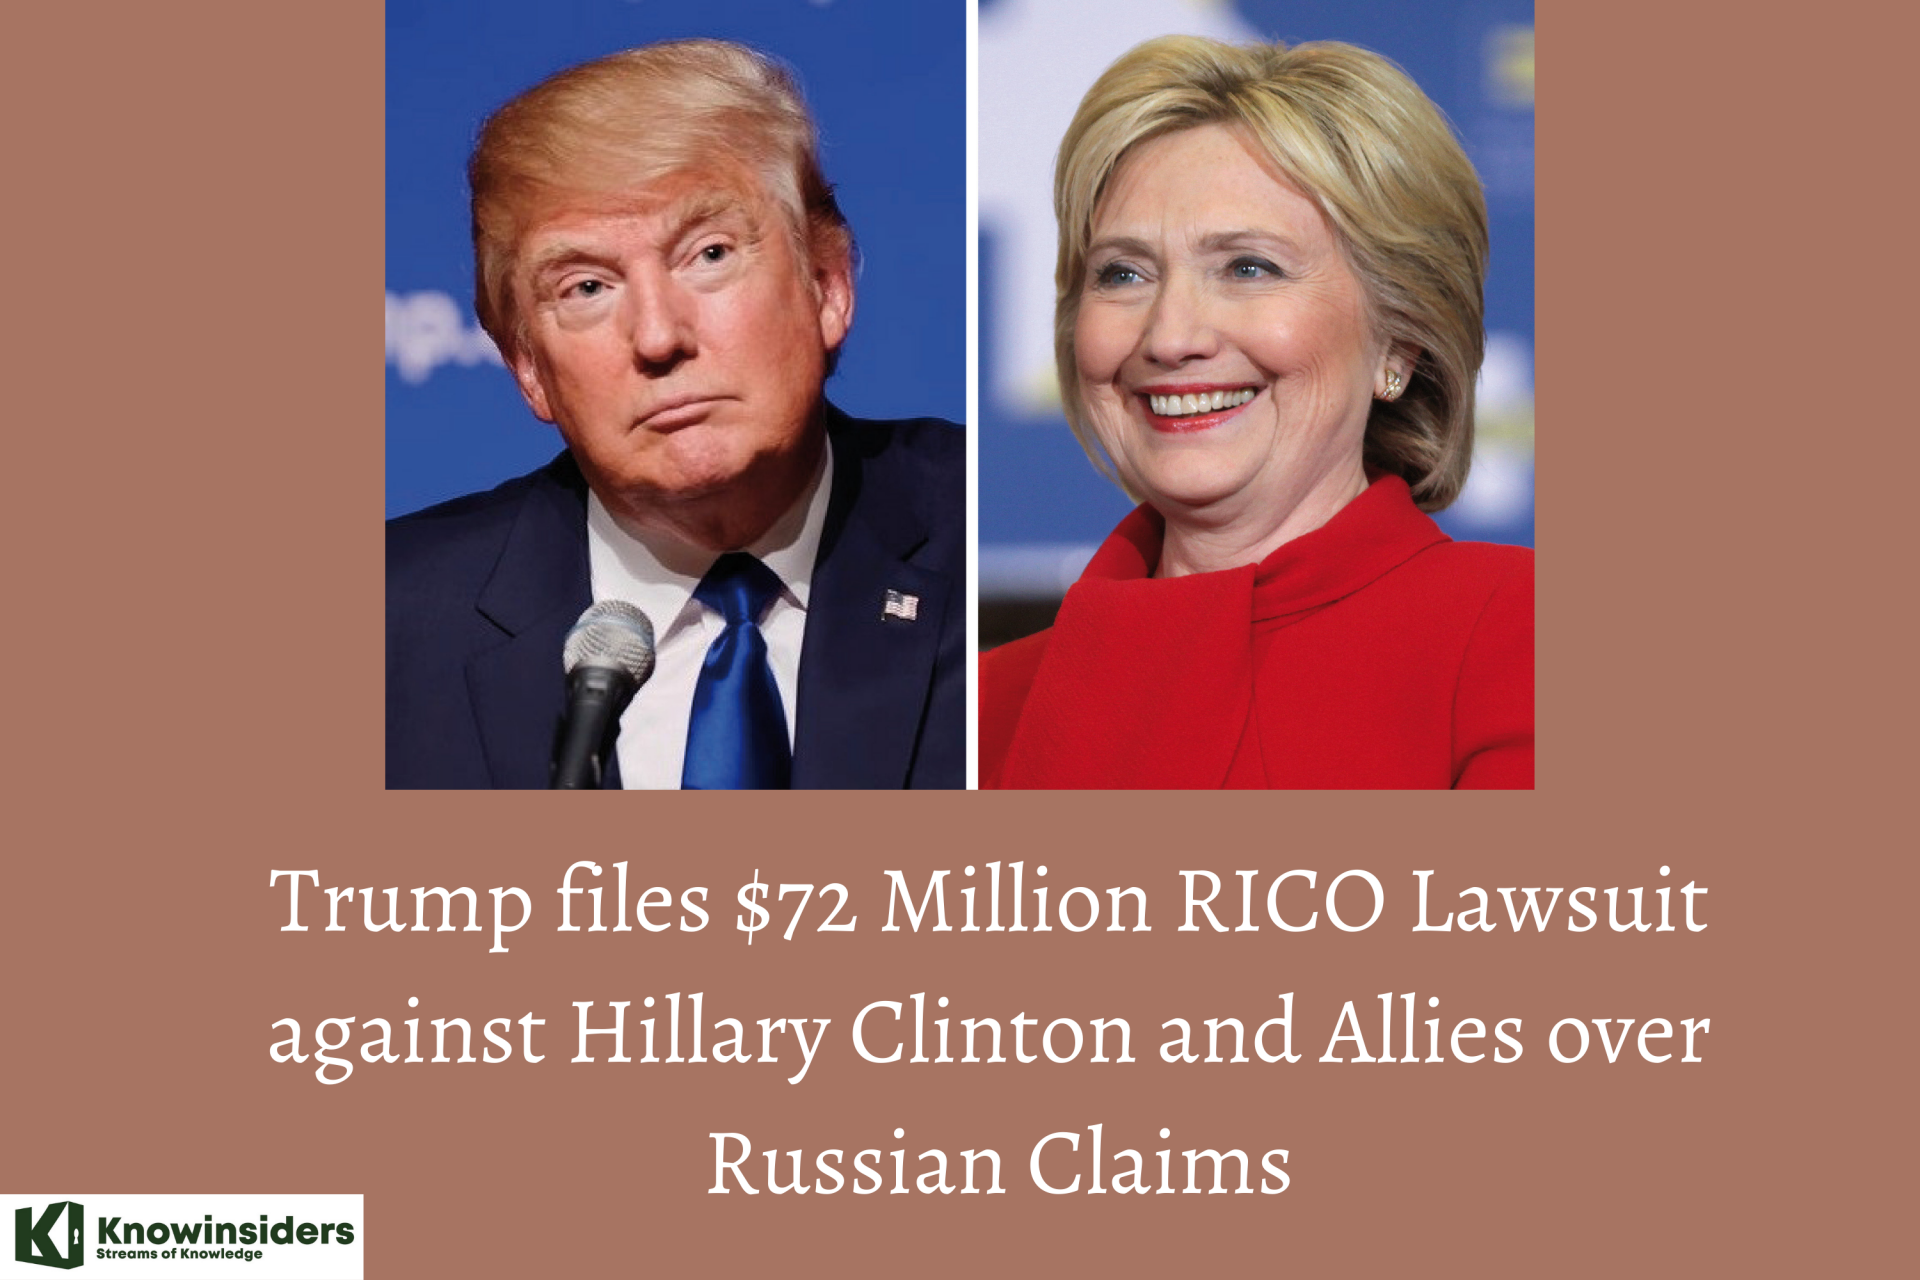 Trump files $72 Million RICO Lawsuit against Hillary Clinton and Allies over Russian Claims